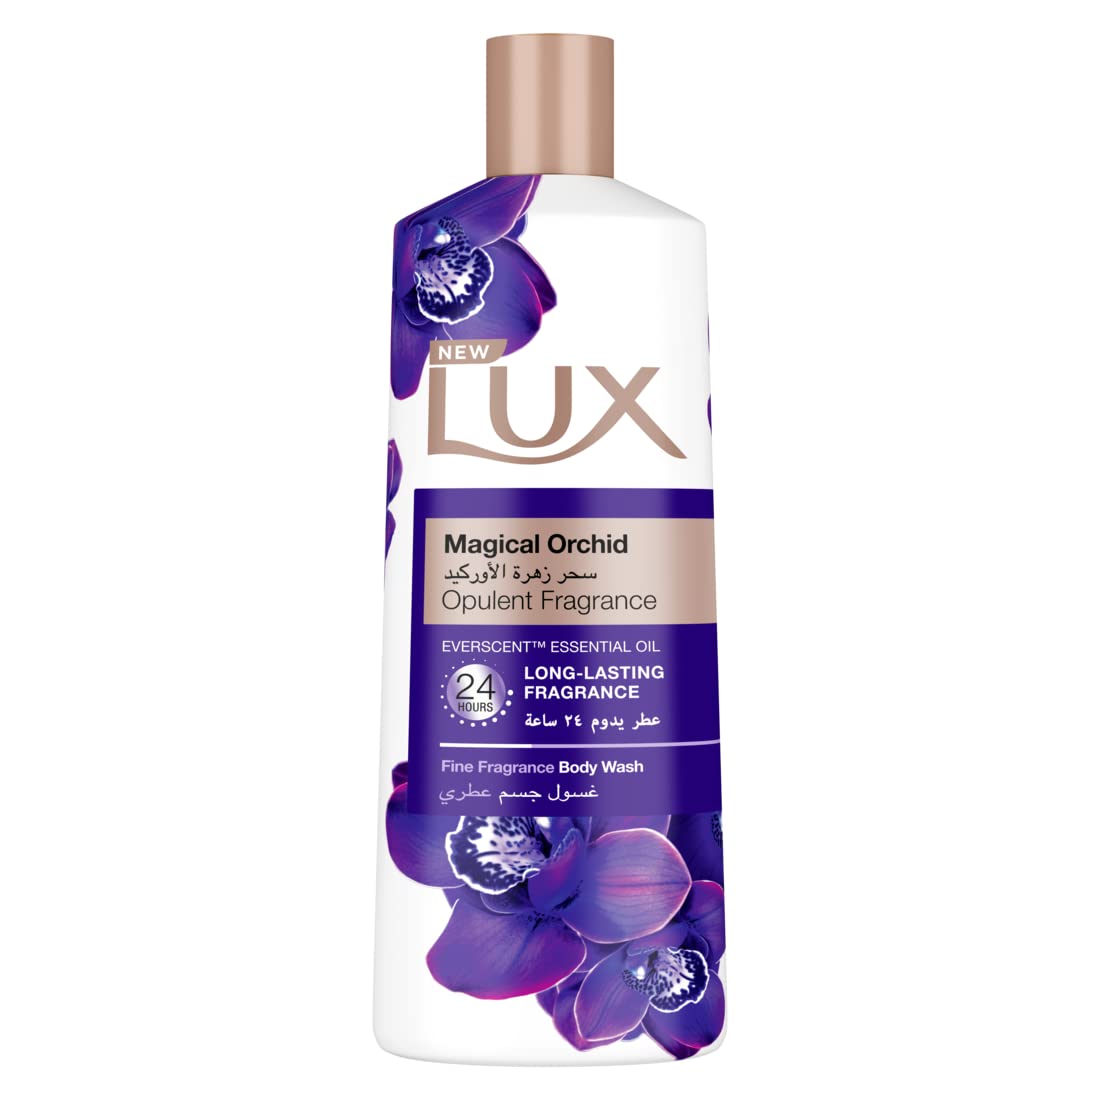 LUX MAGICAL ORCHID 250 ML